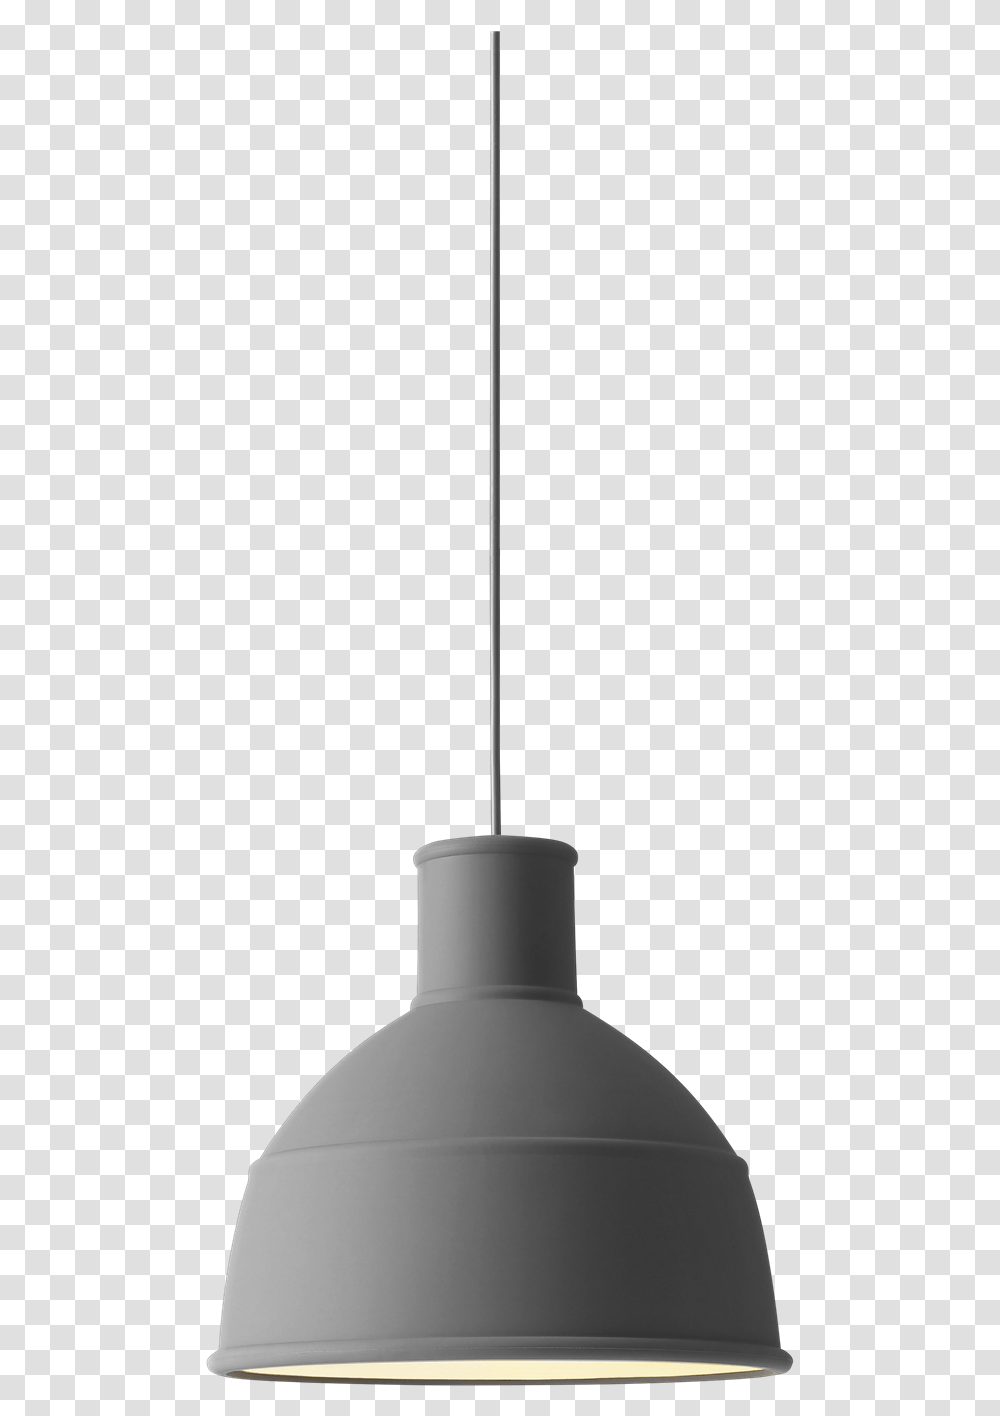 Unfold Pendant Lamp A To Brighten Any Room Muuto Unfold Pendant Lamp Transparent Png